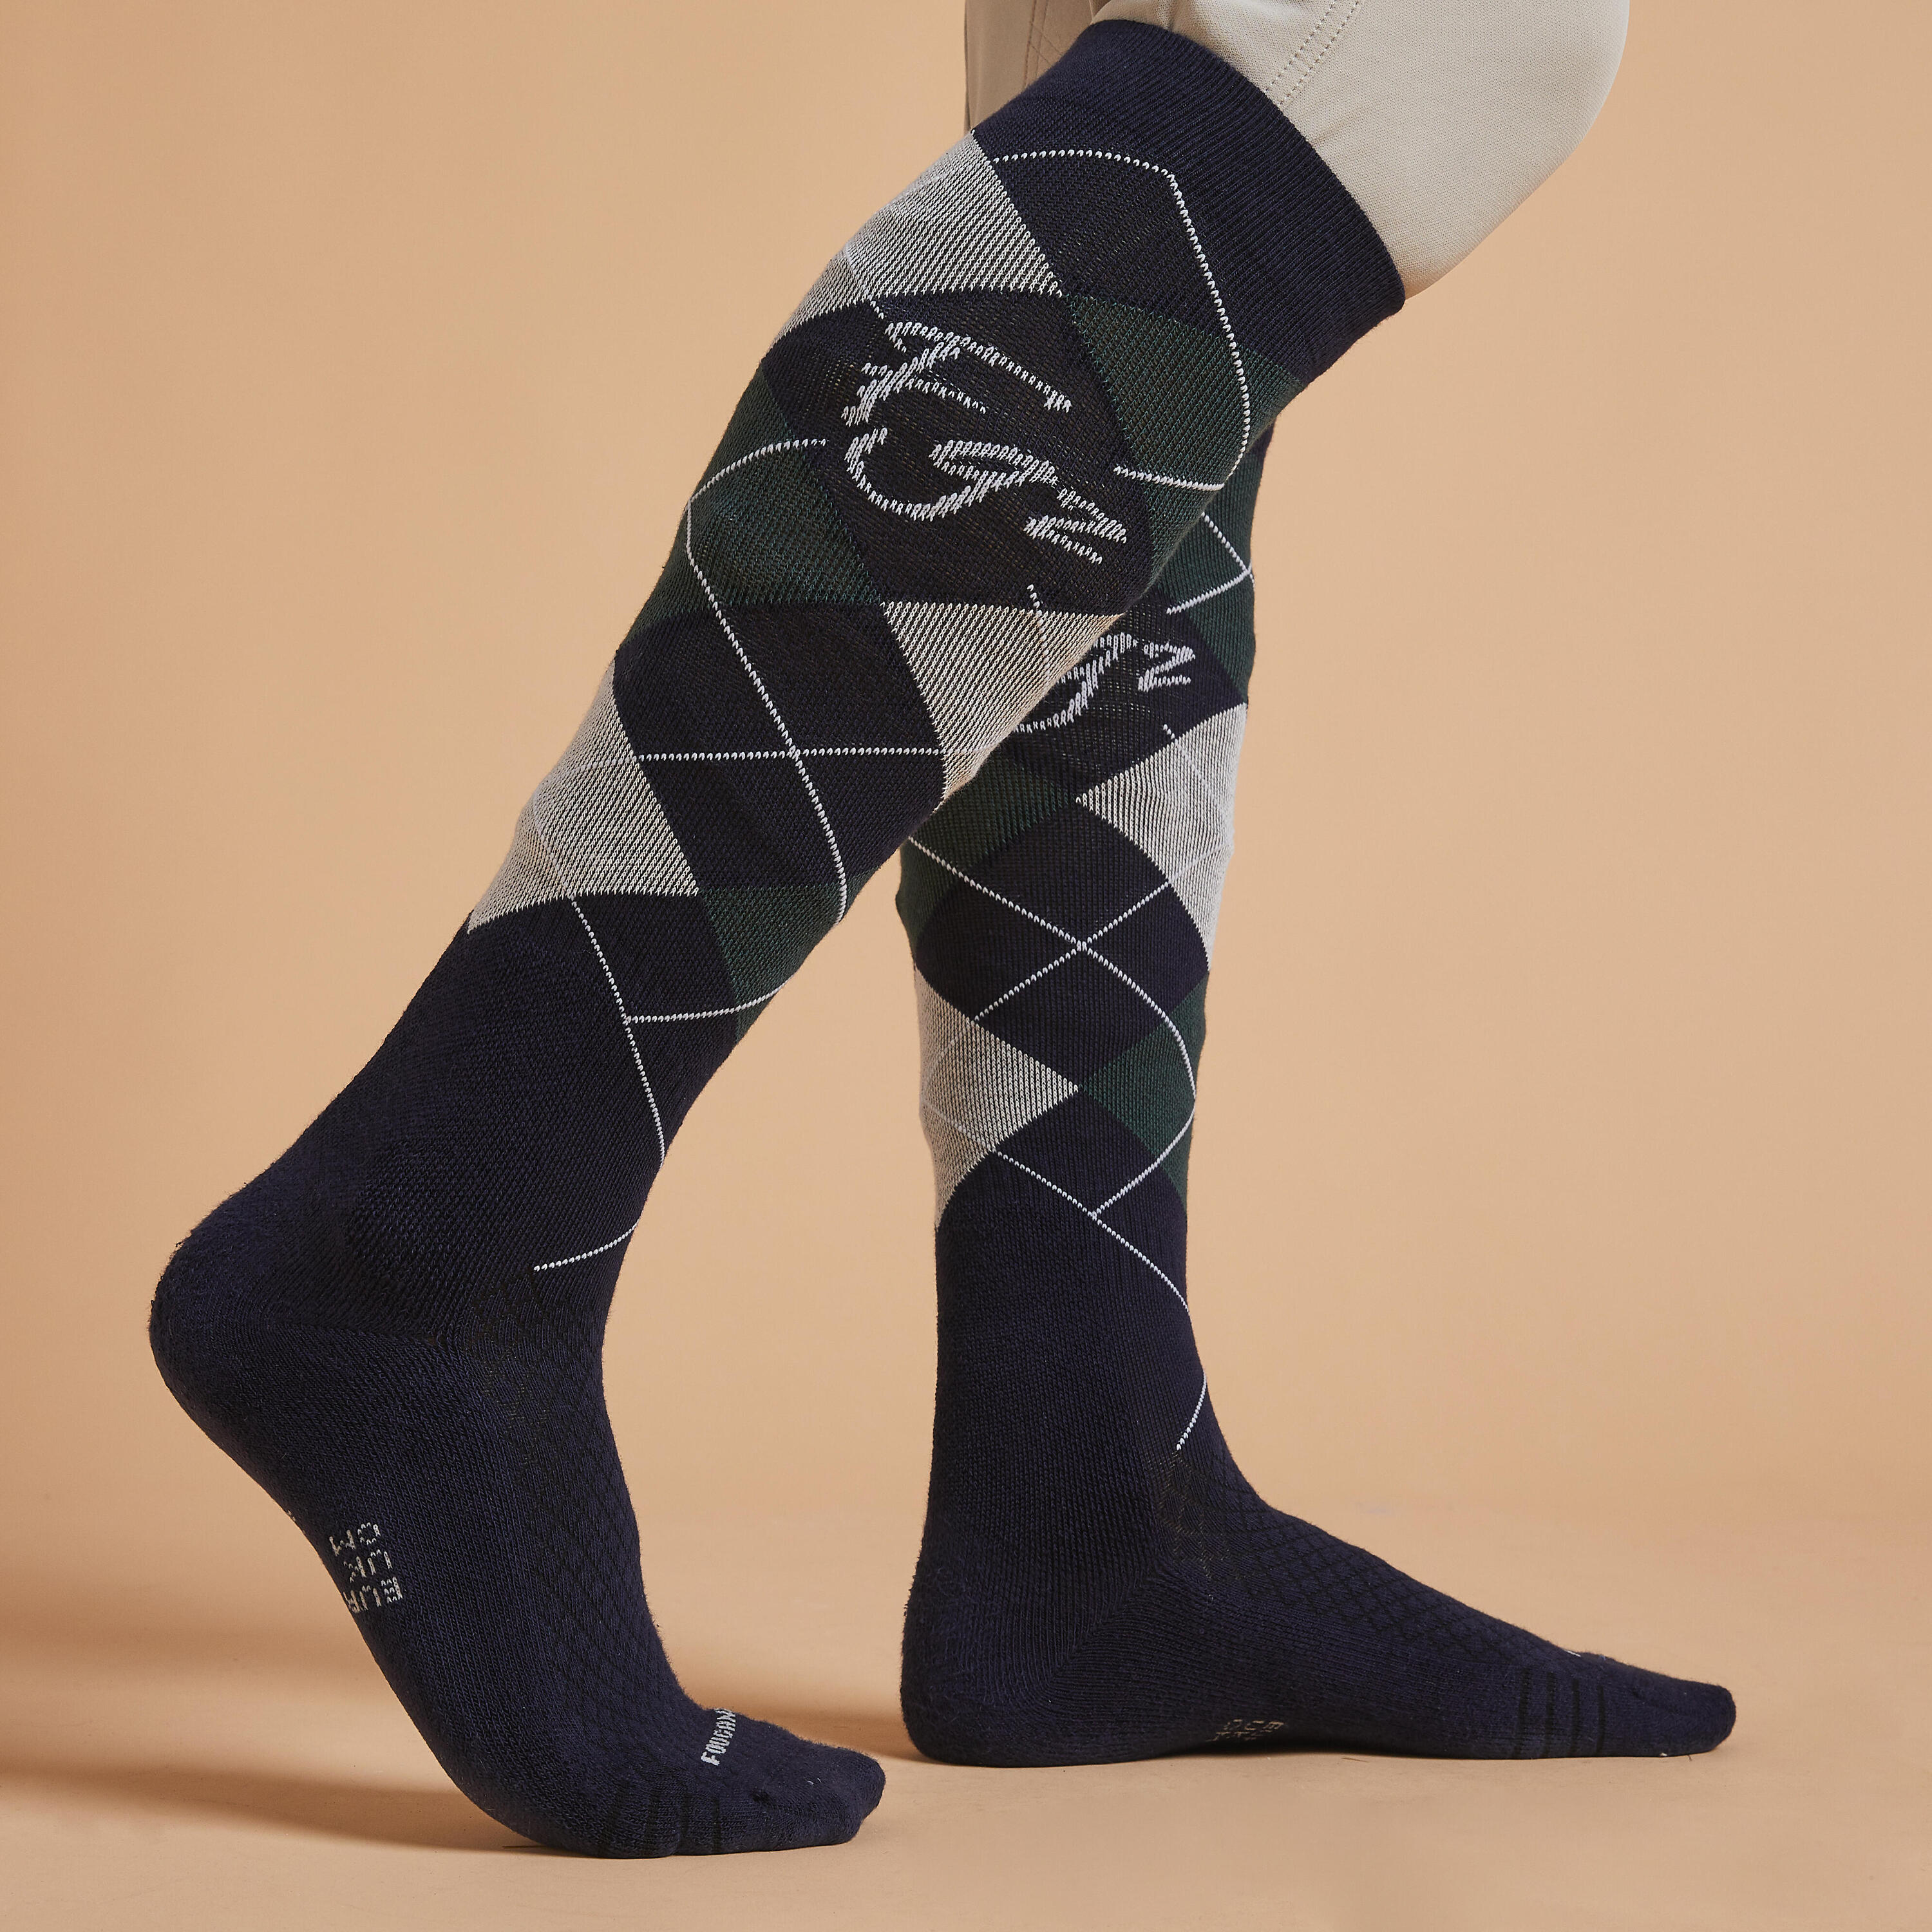 Adult Horse Riding Socks 500 - Blue/Black/Larch Green GraphPack of 2 5/6